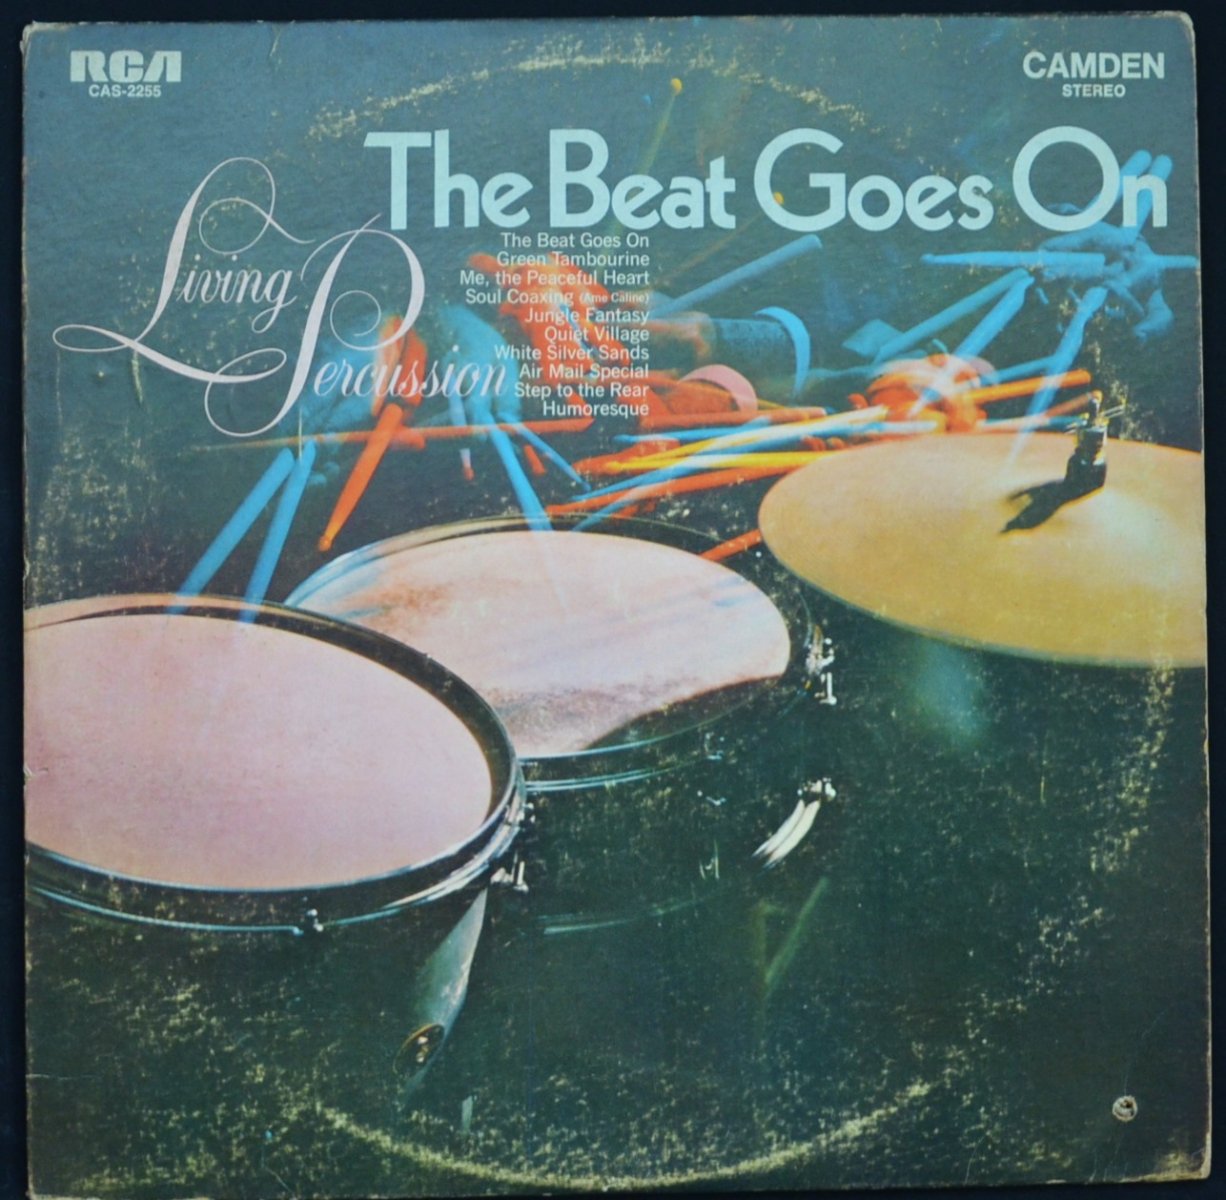 LIVING PERCUSSION / THE BEAT GOES ON (LP)